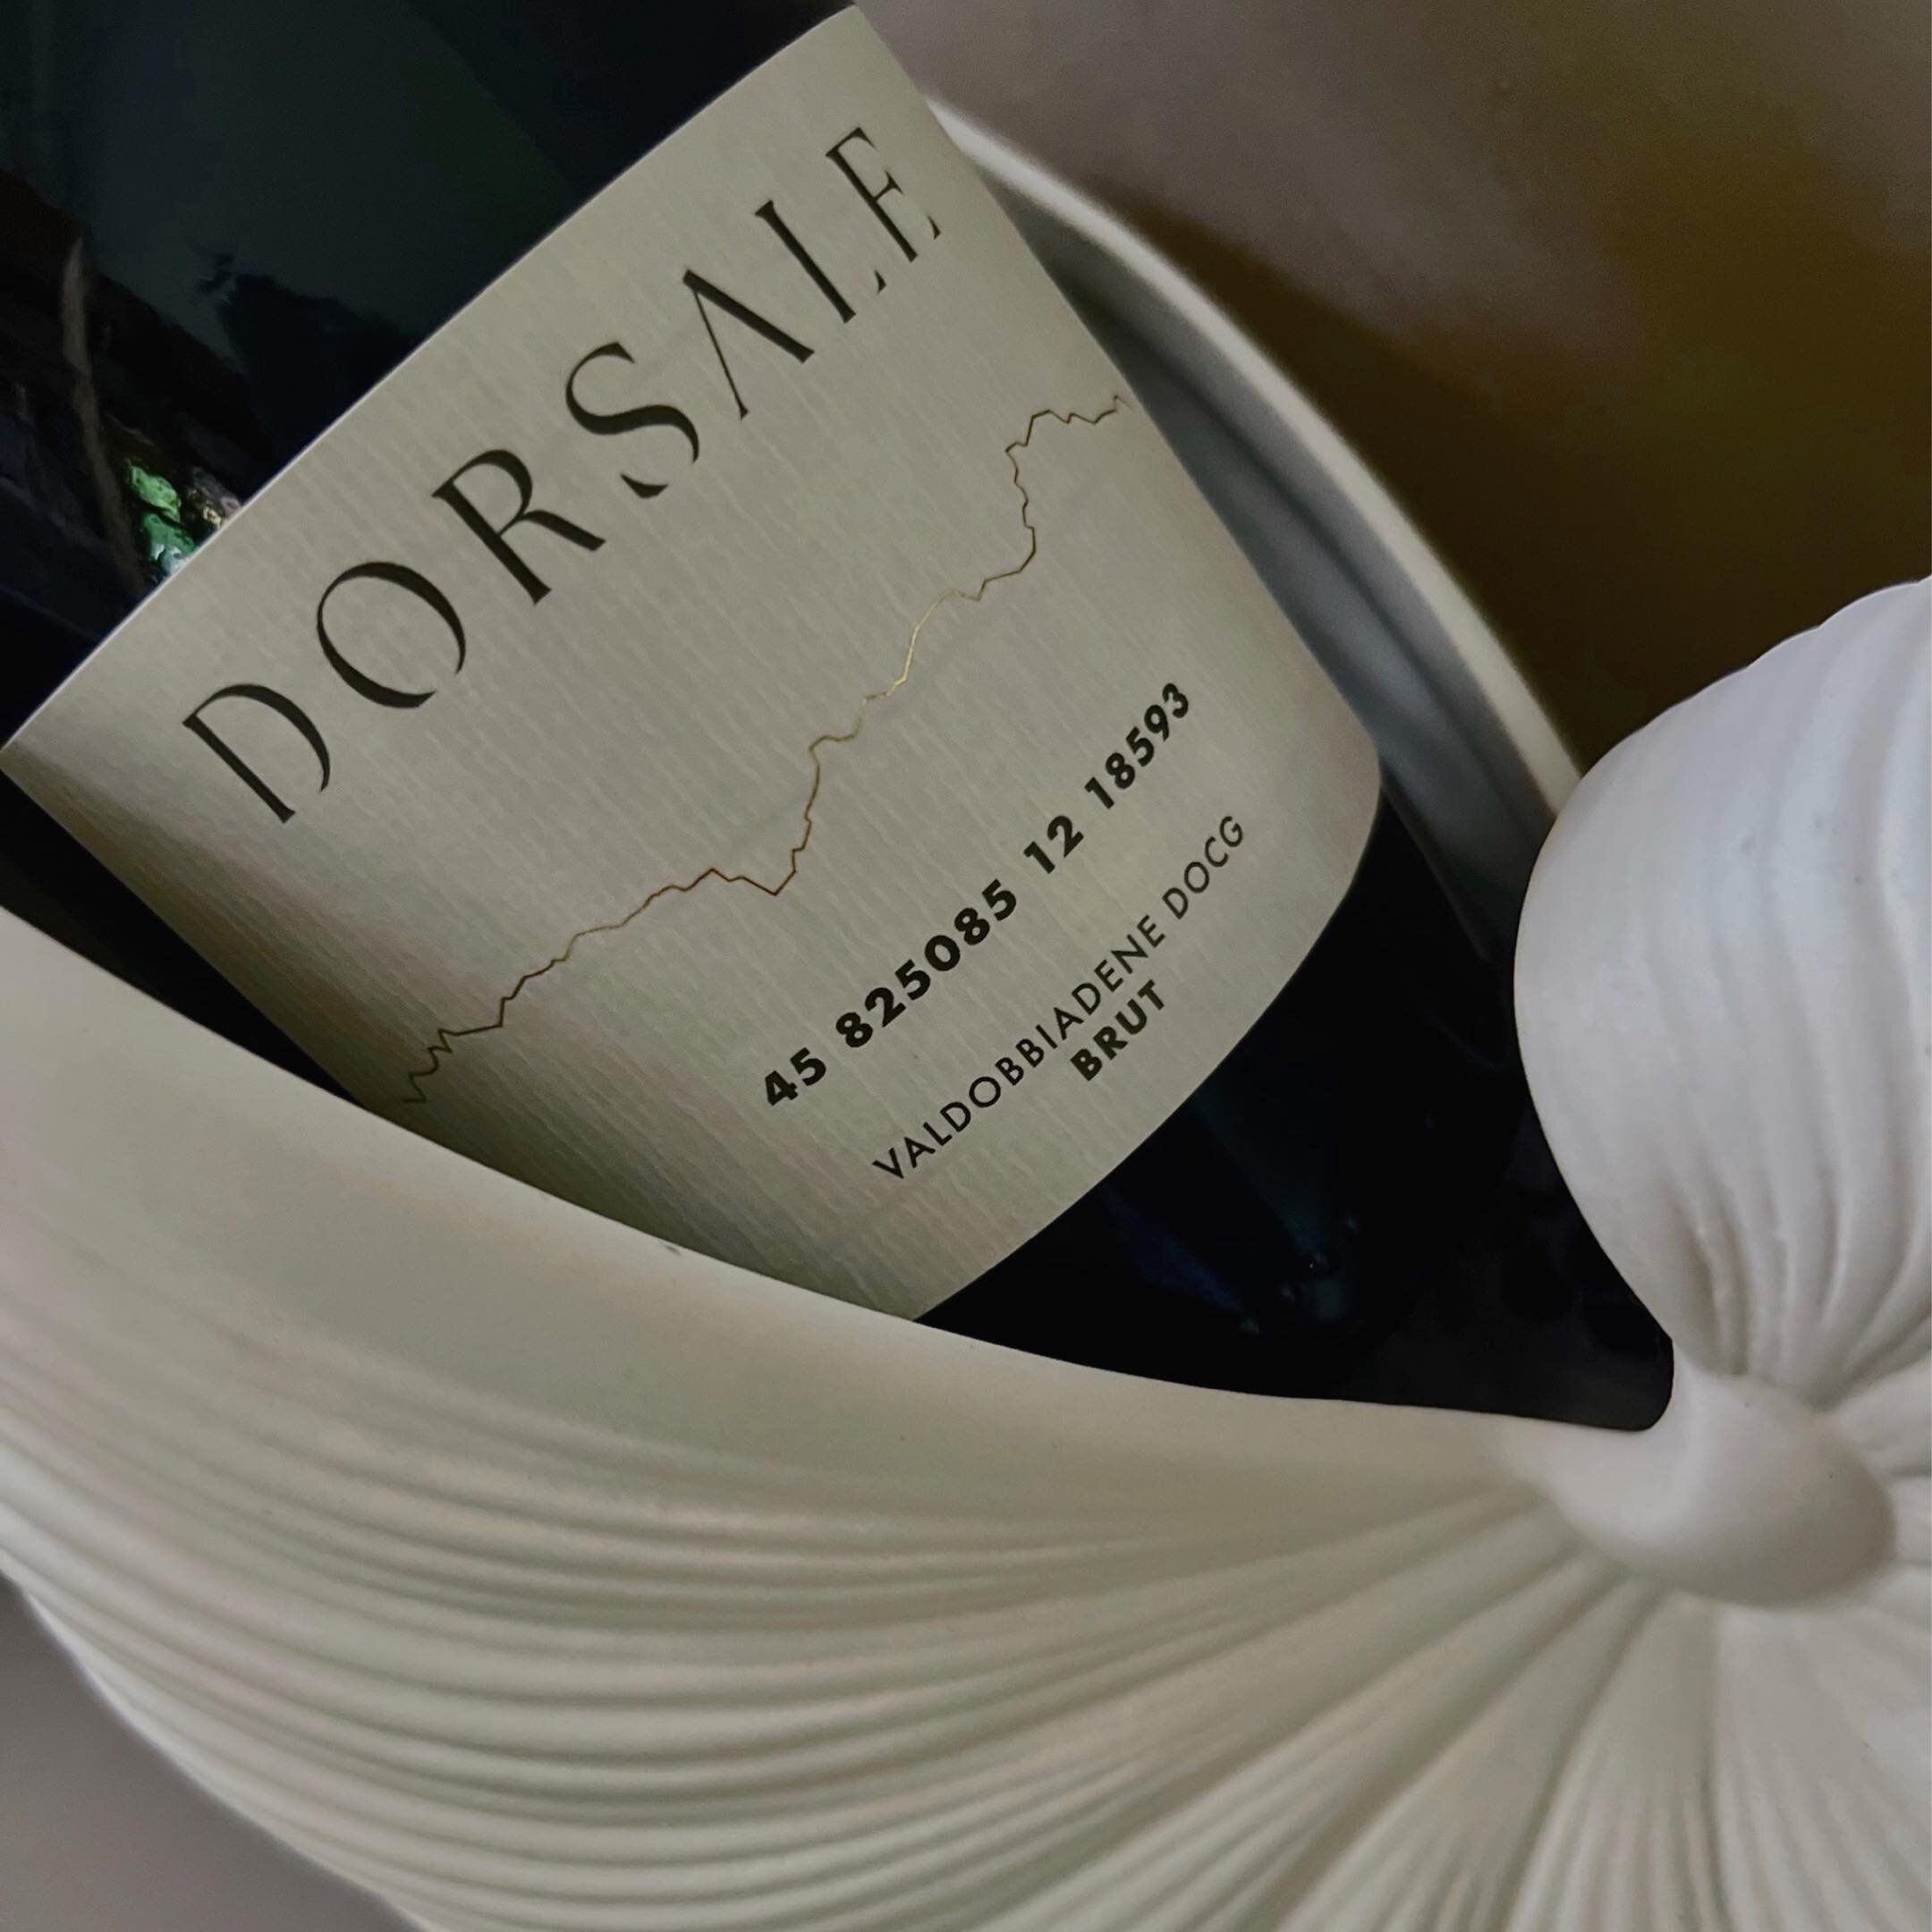 Winter warmers 
Imbued with enough ardent desire to thaw the winter wrost, Dorsale Prosecco&rsquo;s bubbles are set to warm up you everyday
#dorsalewines #dorsaleprosecco

#italianwine

#wine #proseccodocg #montello

#sommelier #winery #vino #winetas